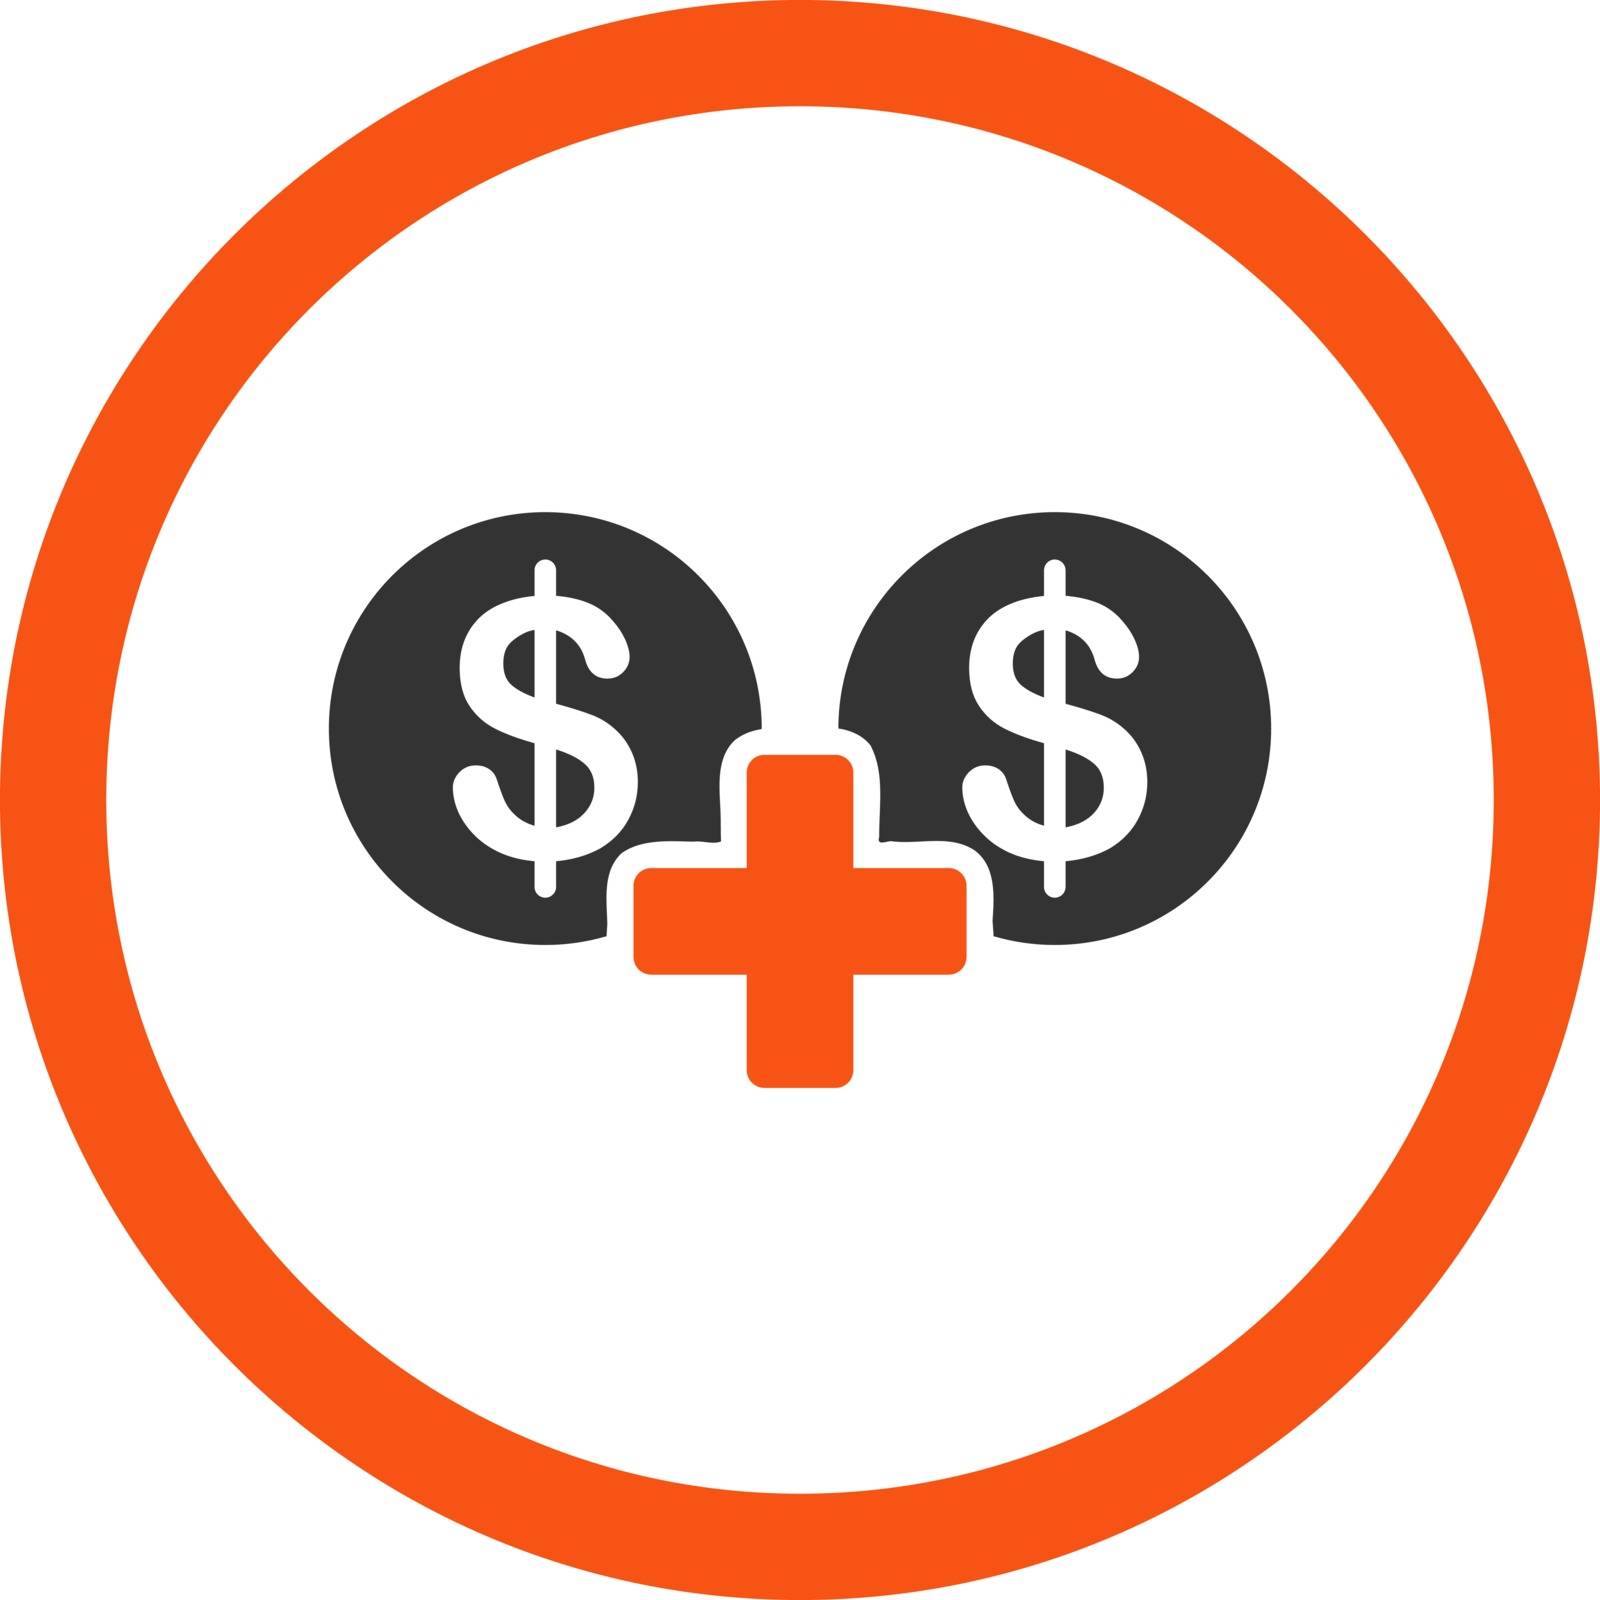 Sum vector icon. This flat rounded symbol uses orange and gray colors and isolated on a white background.